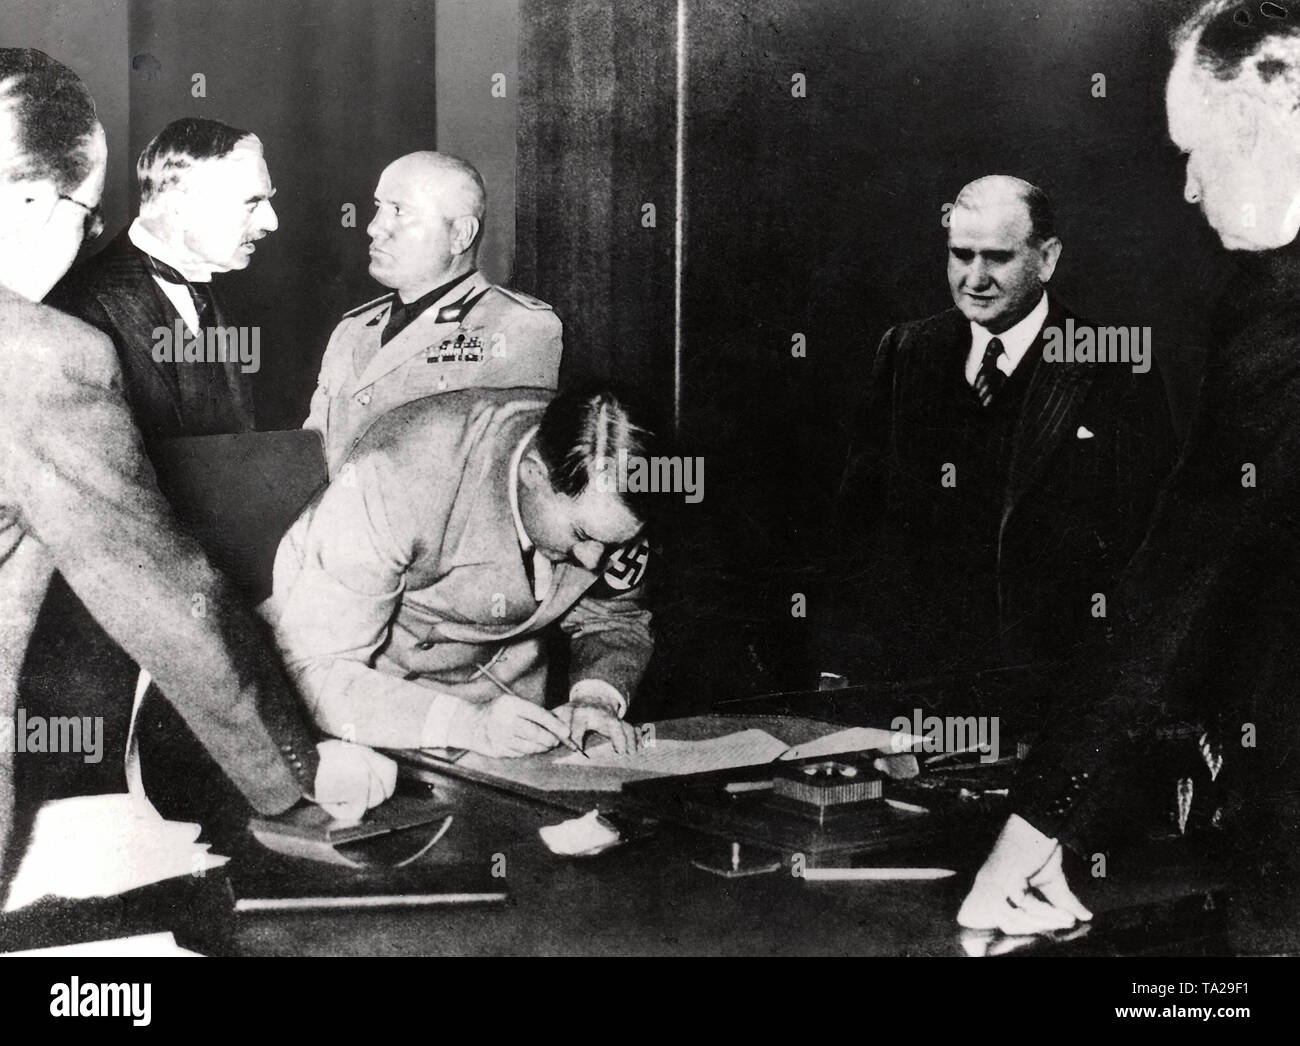 Adolf Hitler signed the agreement on the transfer of the Sudetenland to the German Reich at the end of the Munich Conference. The photo shows: British Prime Minister Neville Chamberlain, Italian Duce Benito Mussolini, Adolf Hitler, French Prime Minister Edouard Daladier and German Foreign Minister Joachim von Ribbentrop. Stock Photo